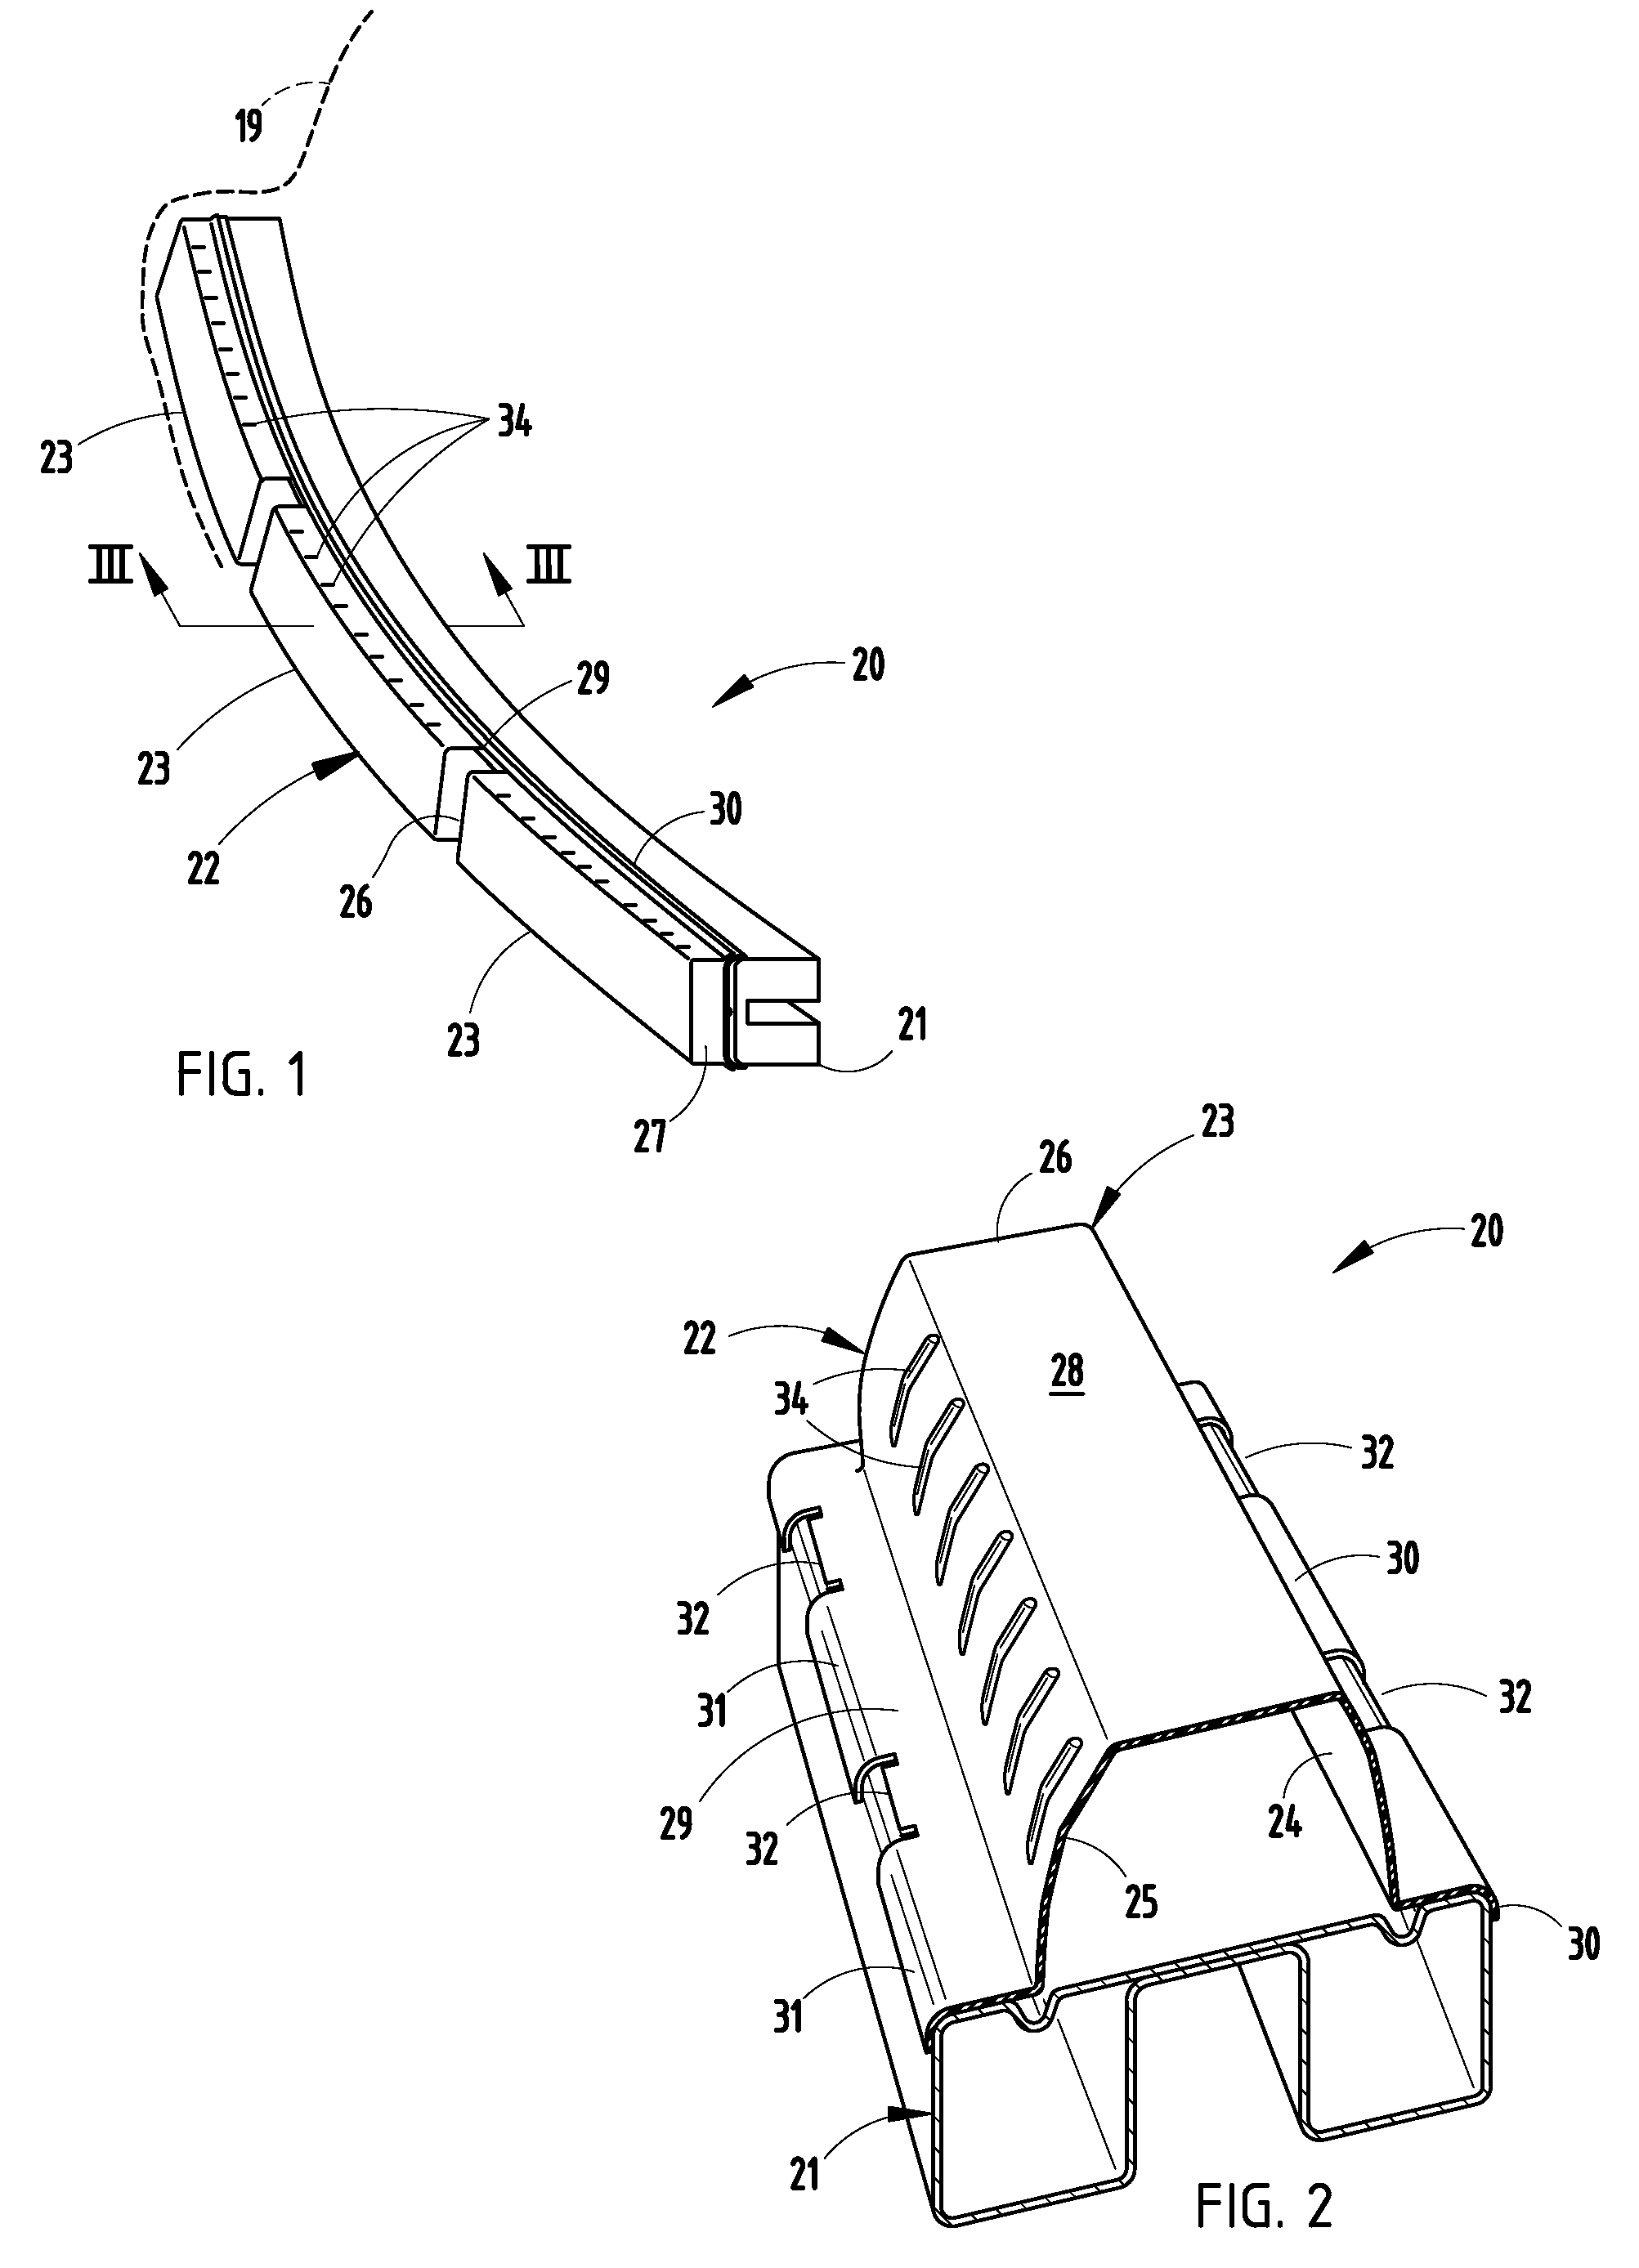 Energy absorber with sidewall stabilizer ribs